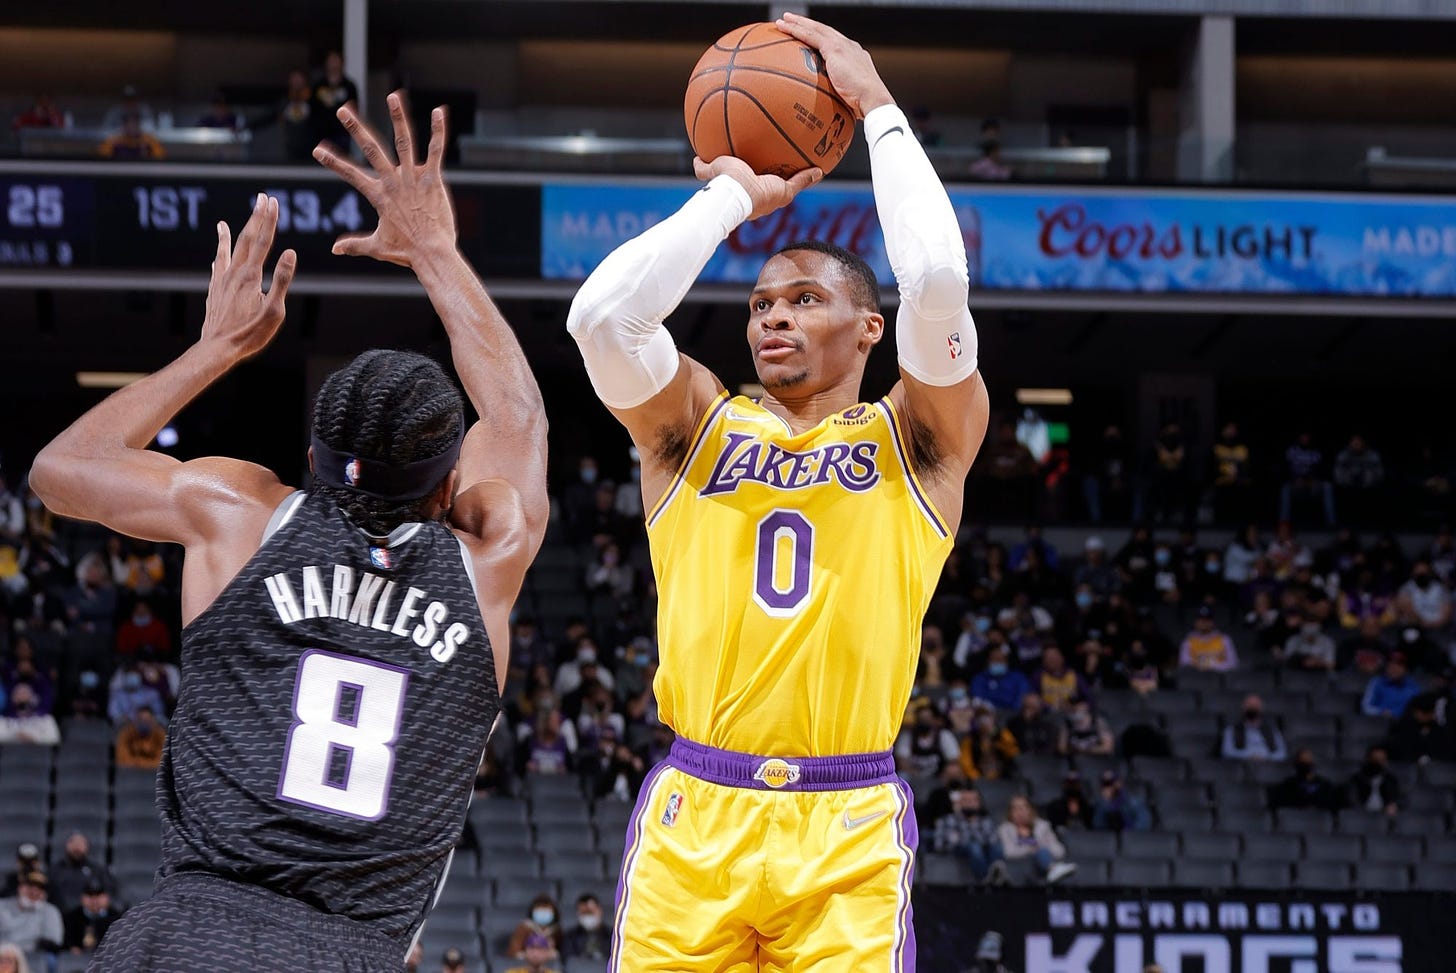 Russell Westbrook on shooting slump after Lakers loss to Grizzlies